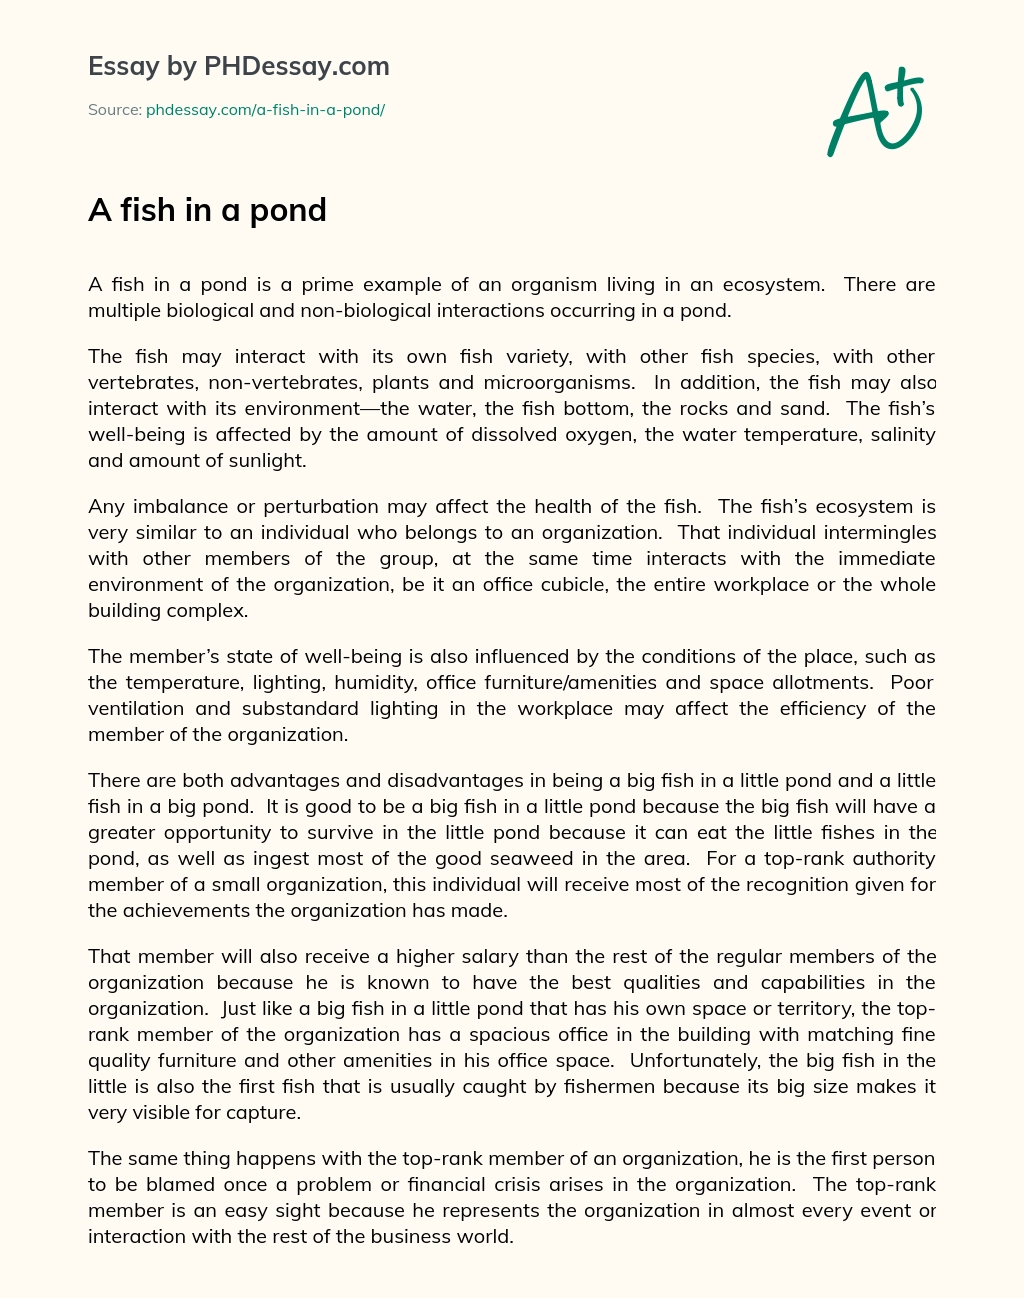 A fish in a pond essay